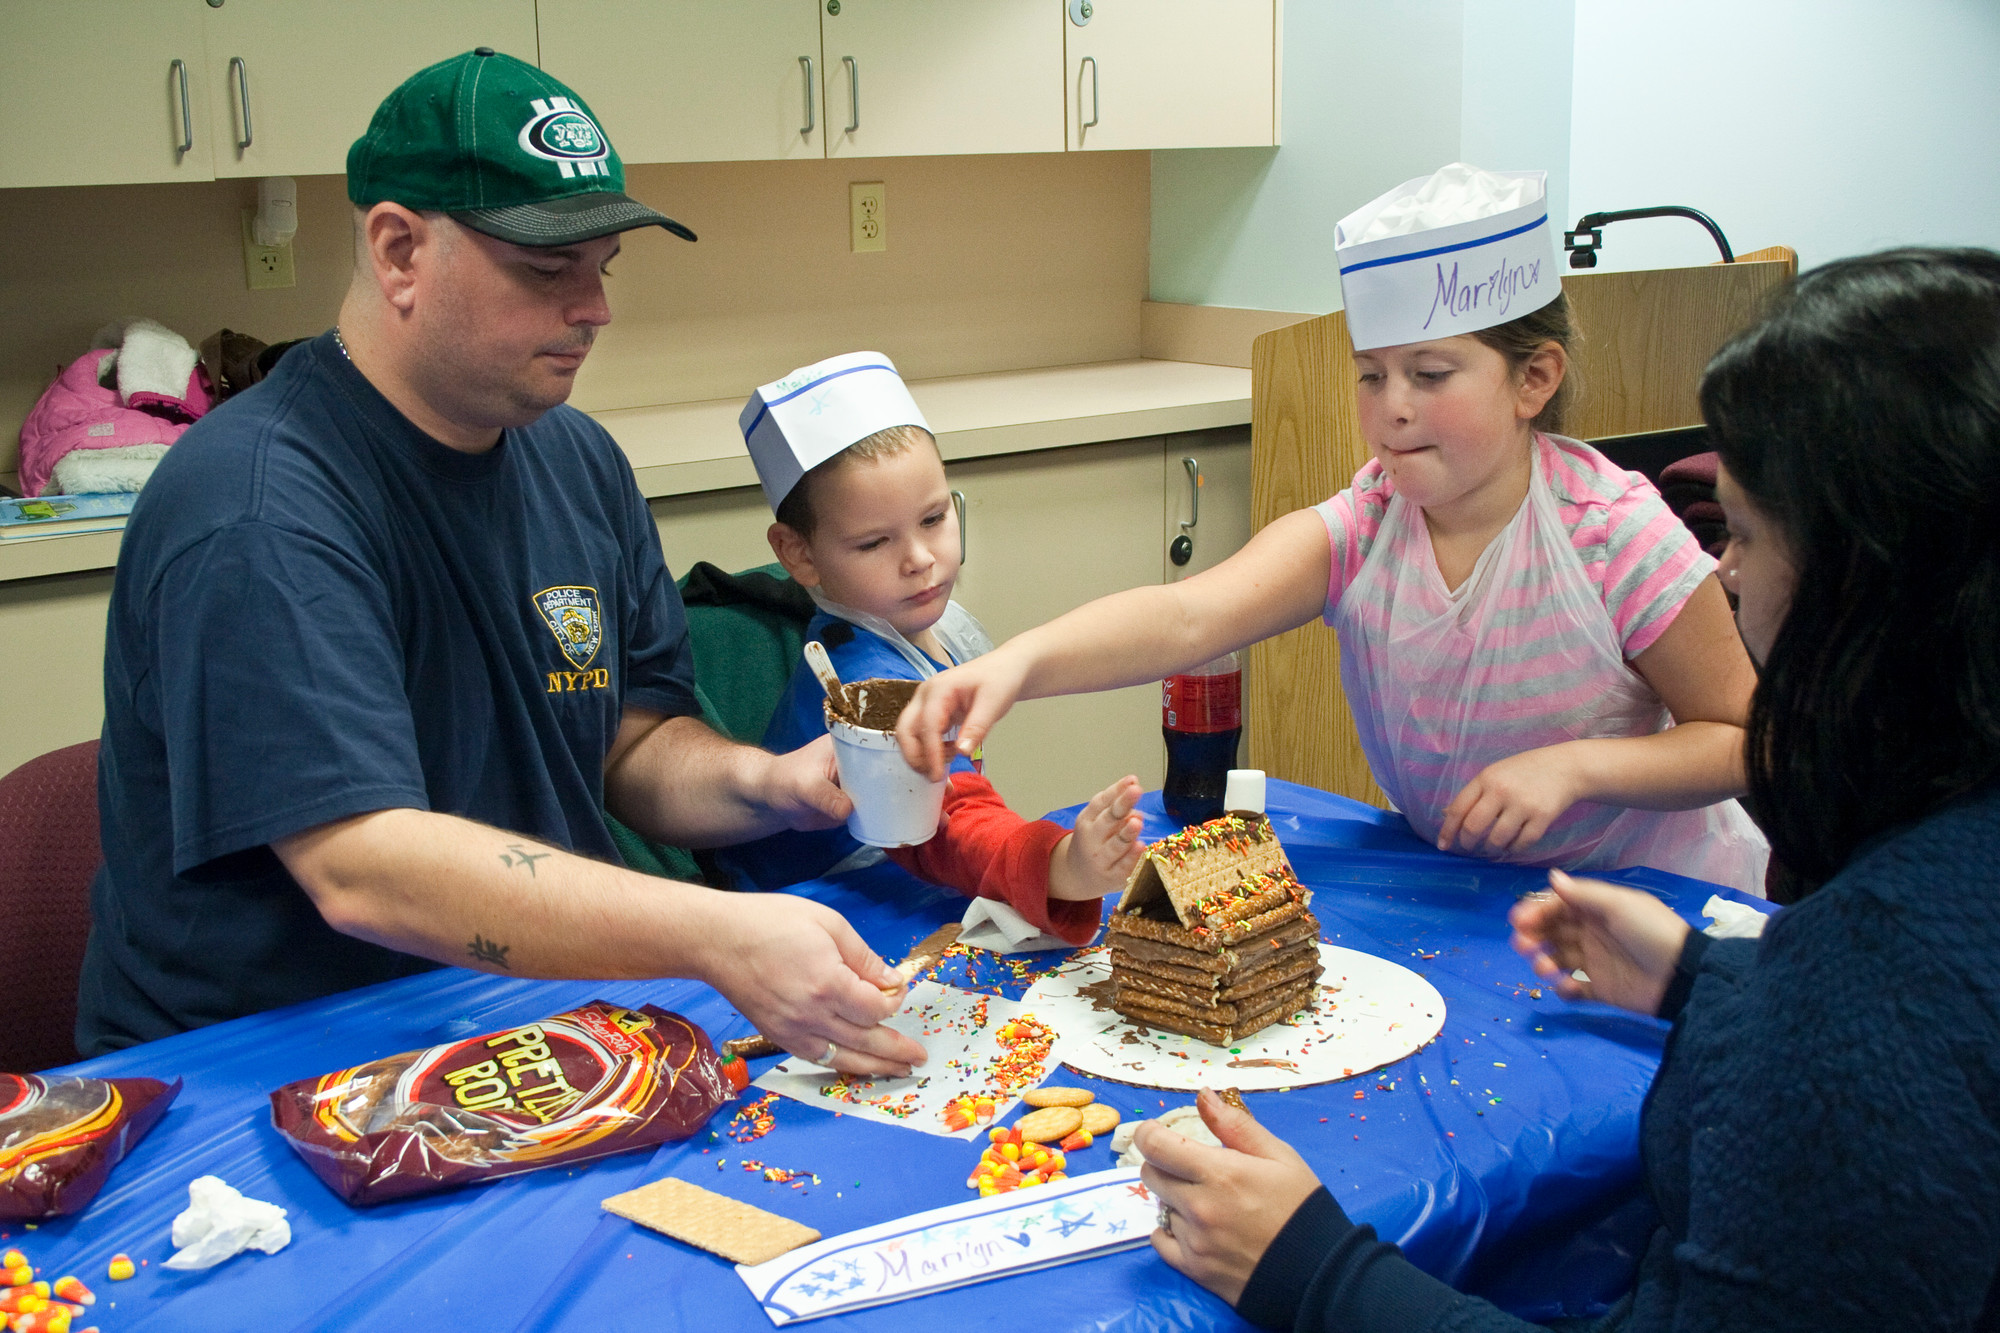 From left, Sean Sullivan, Mark Sullivan, 4, Marilyn Sullivan, 8, and Evelyn Escobar add the finishing touches to their pretzle log cabin.